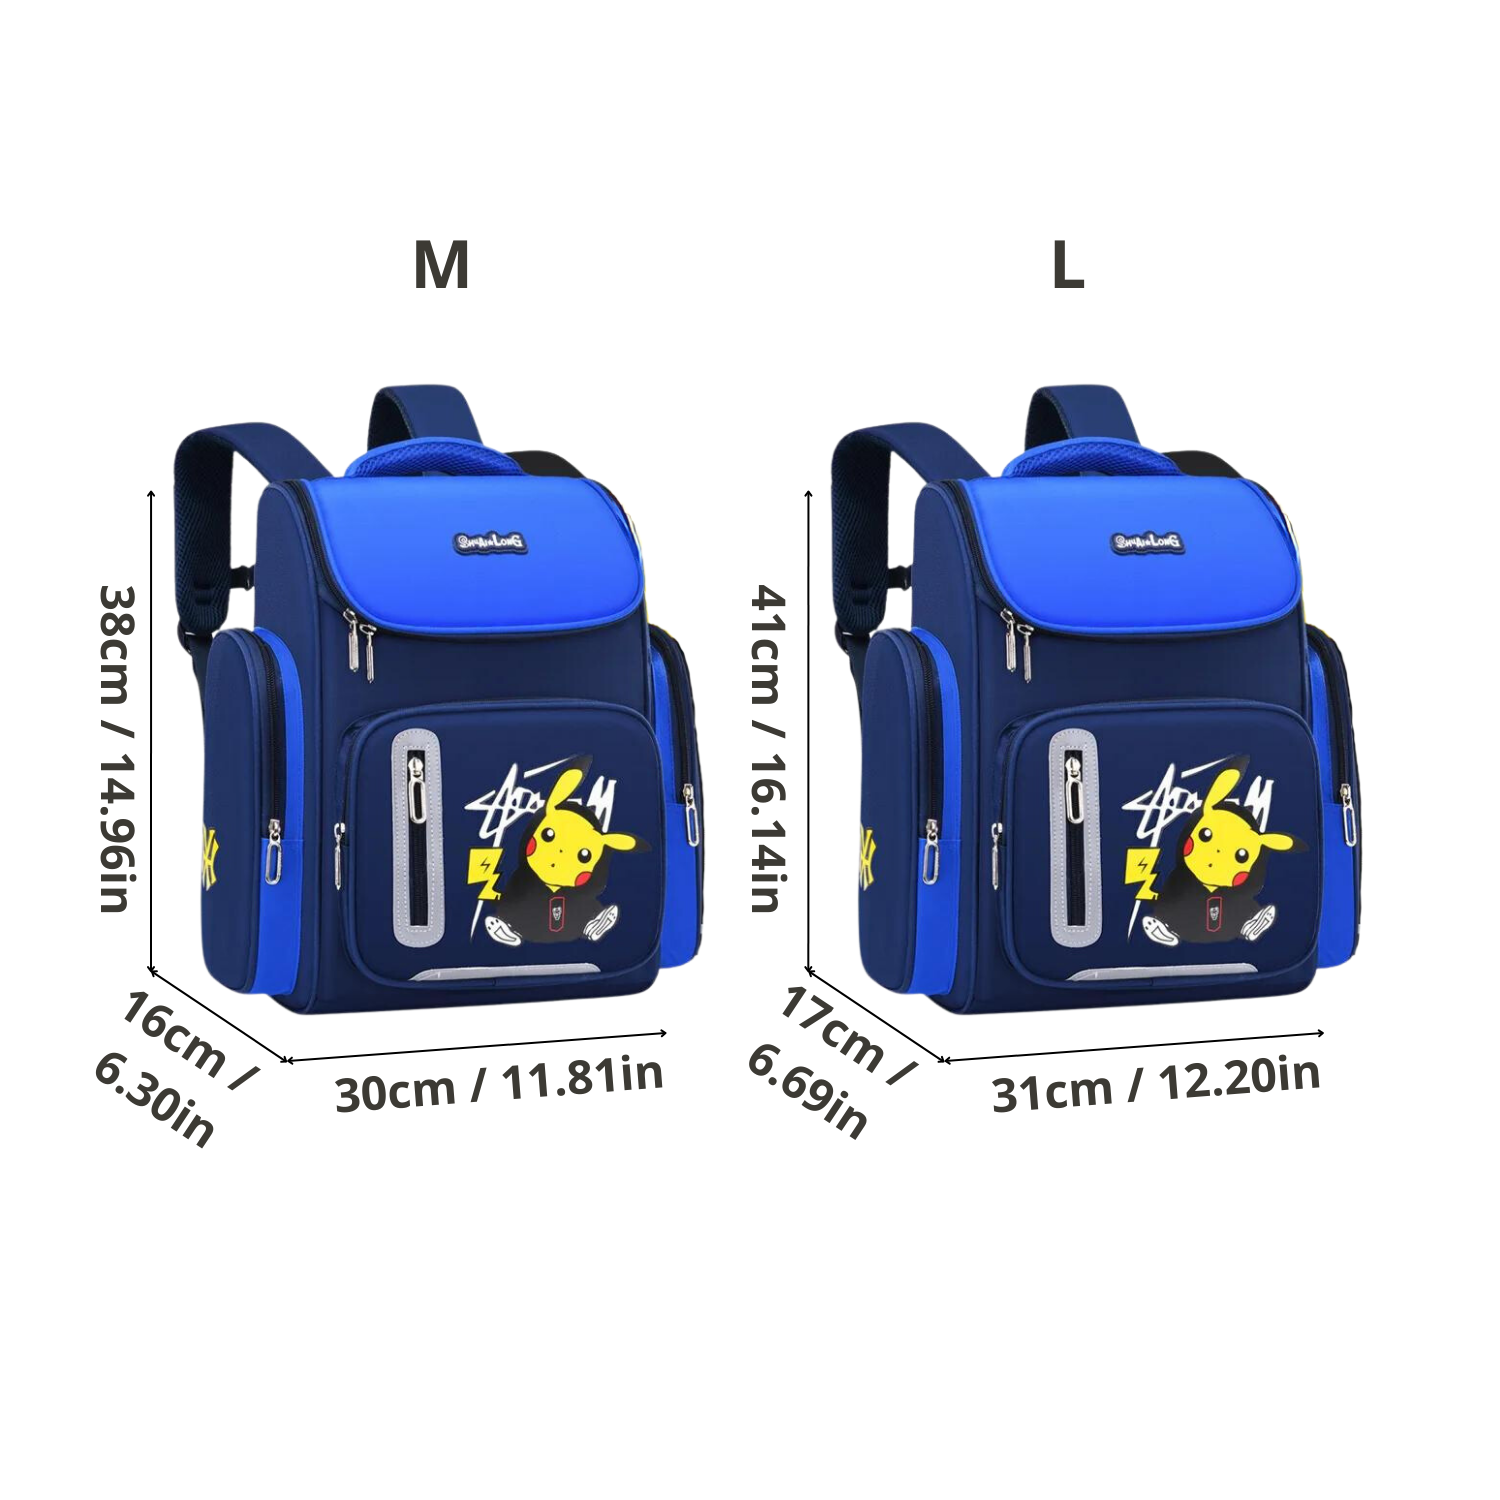 Electric-Themed Cartoon Character Backpack